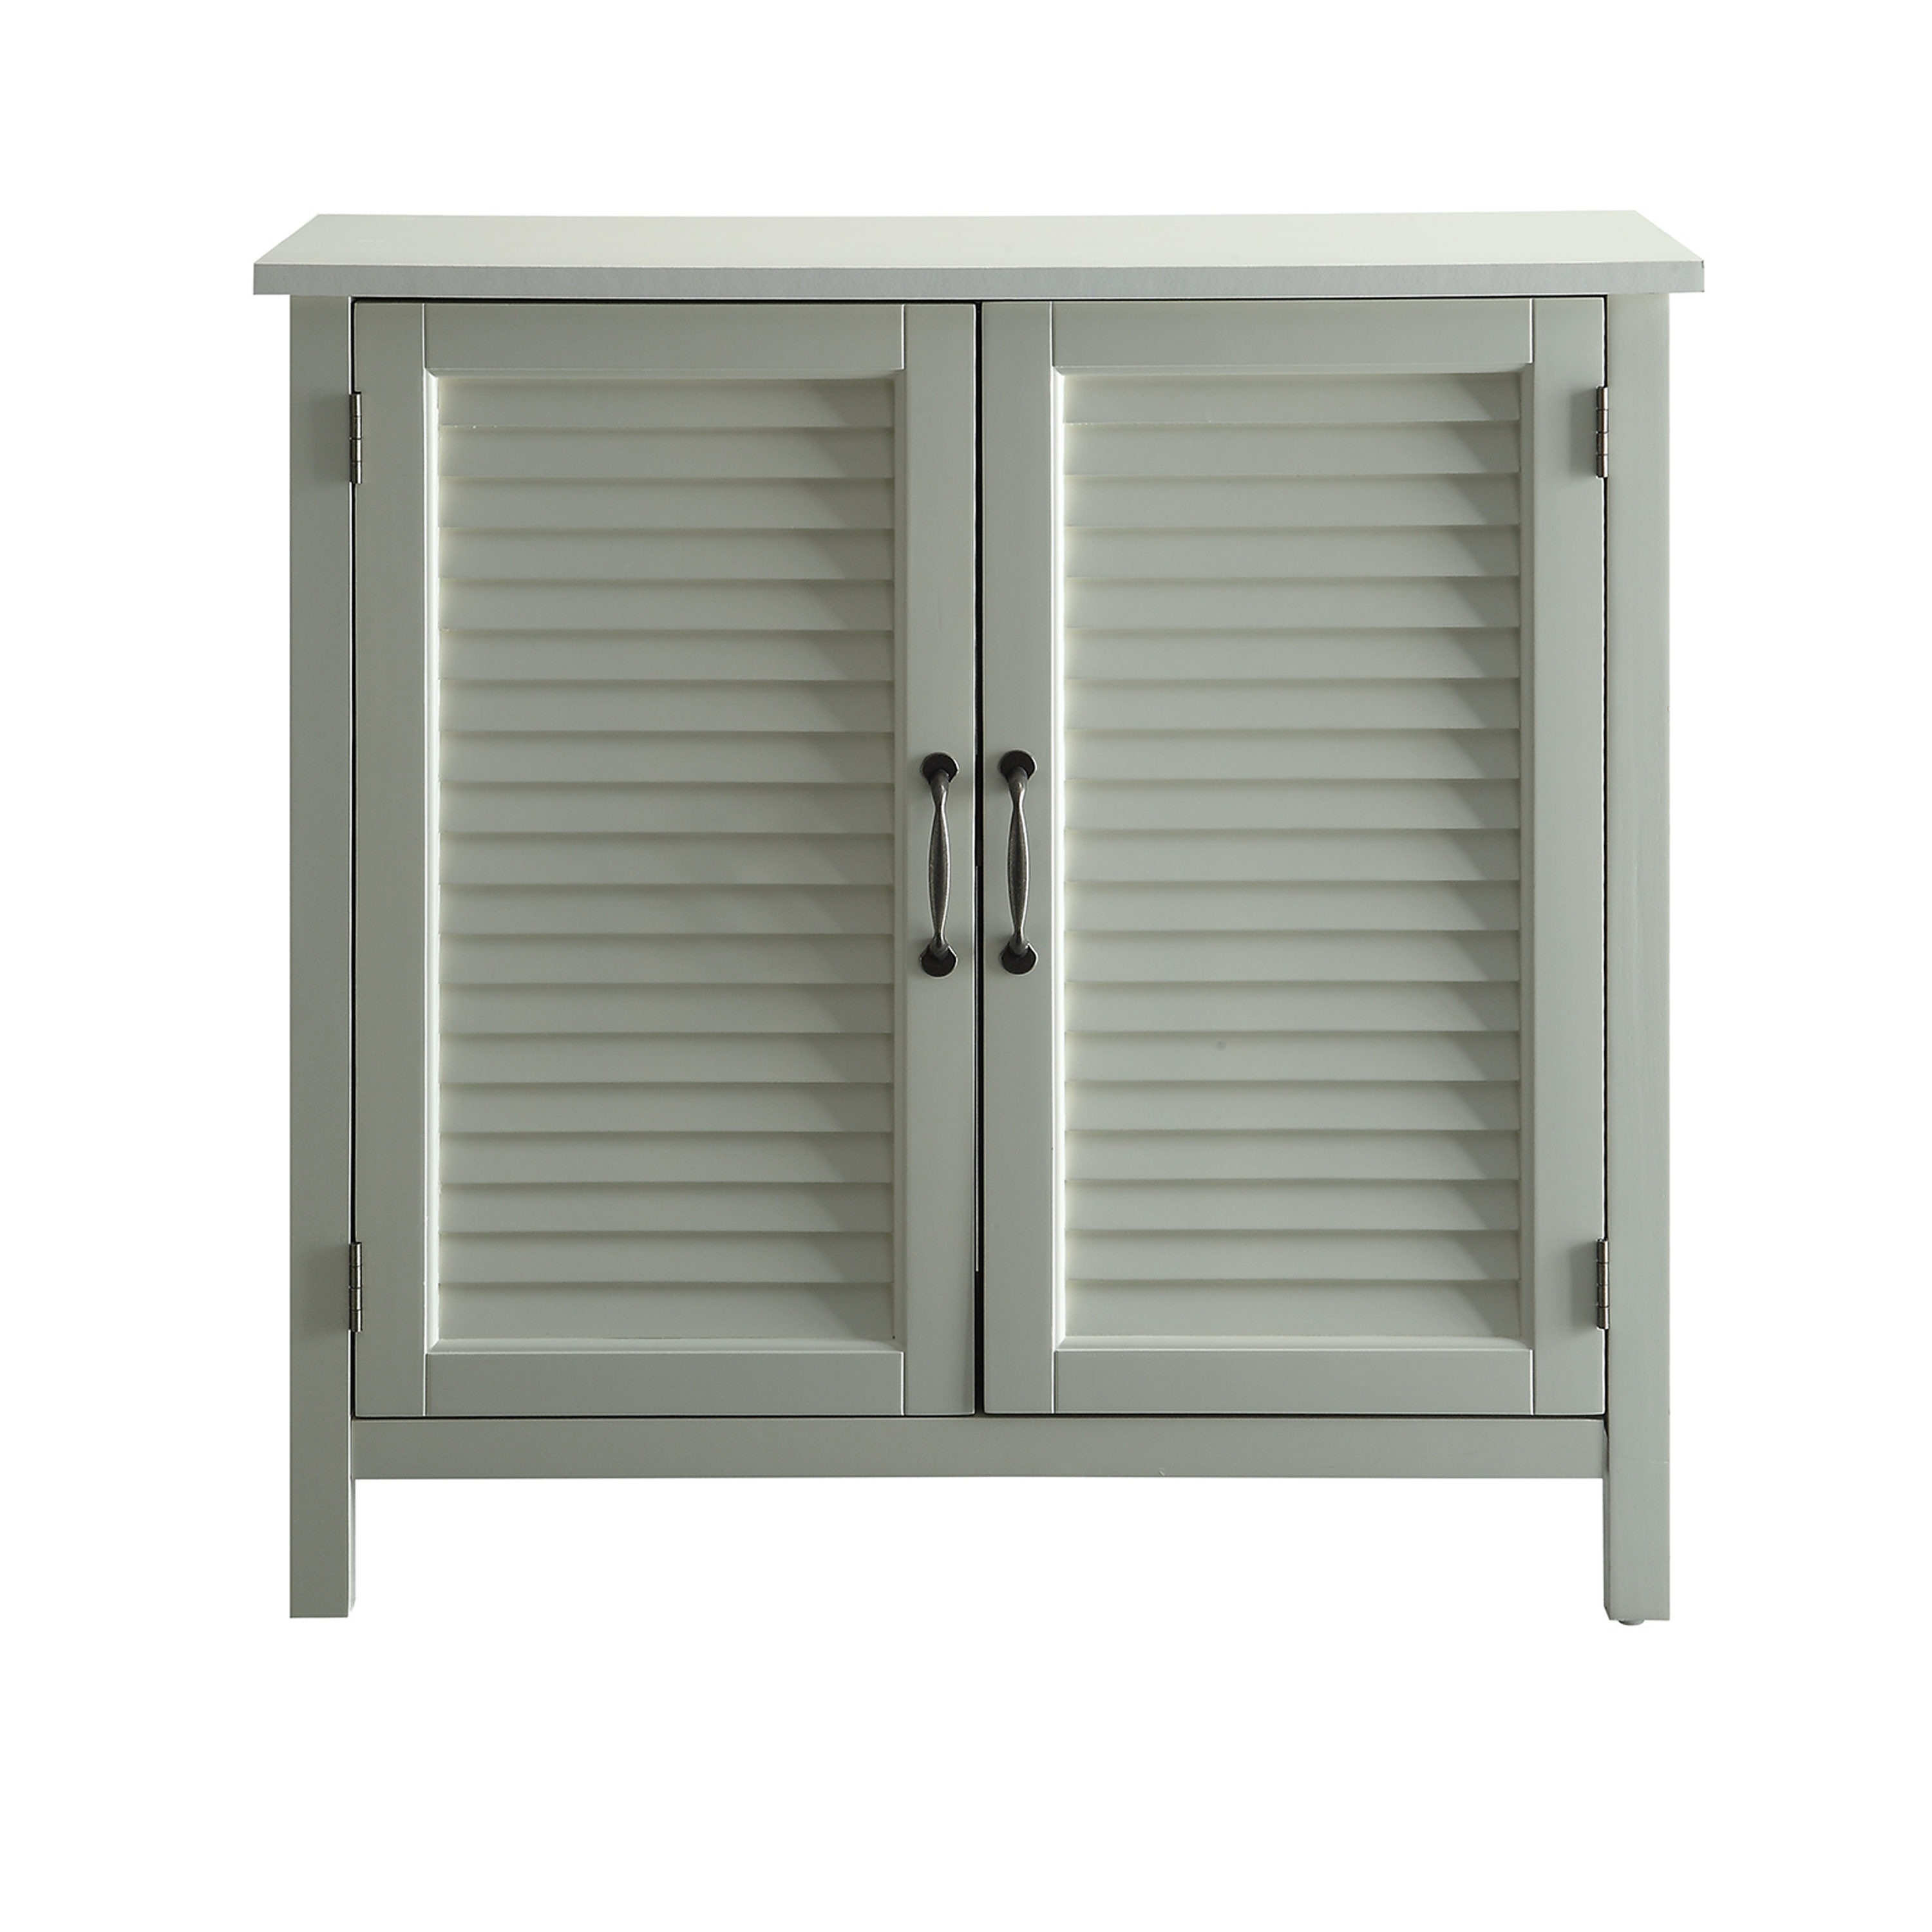 Accent Cabinet 2 Shutter Doors Transitional Polar Off-white Wood Pine China Cabinet | - Belray Home Furnishings & Decor LBF19087C5-PW